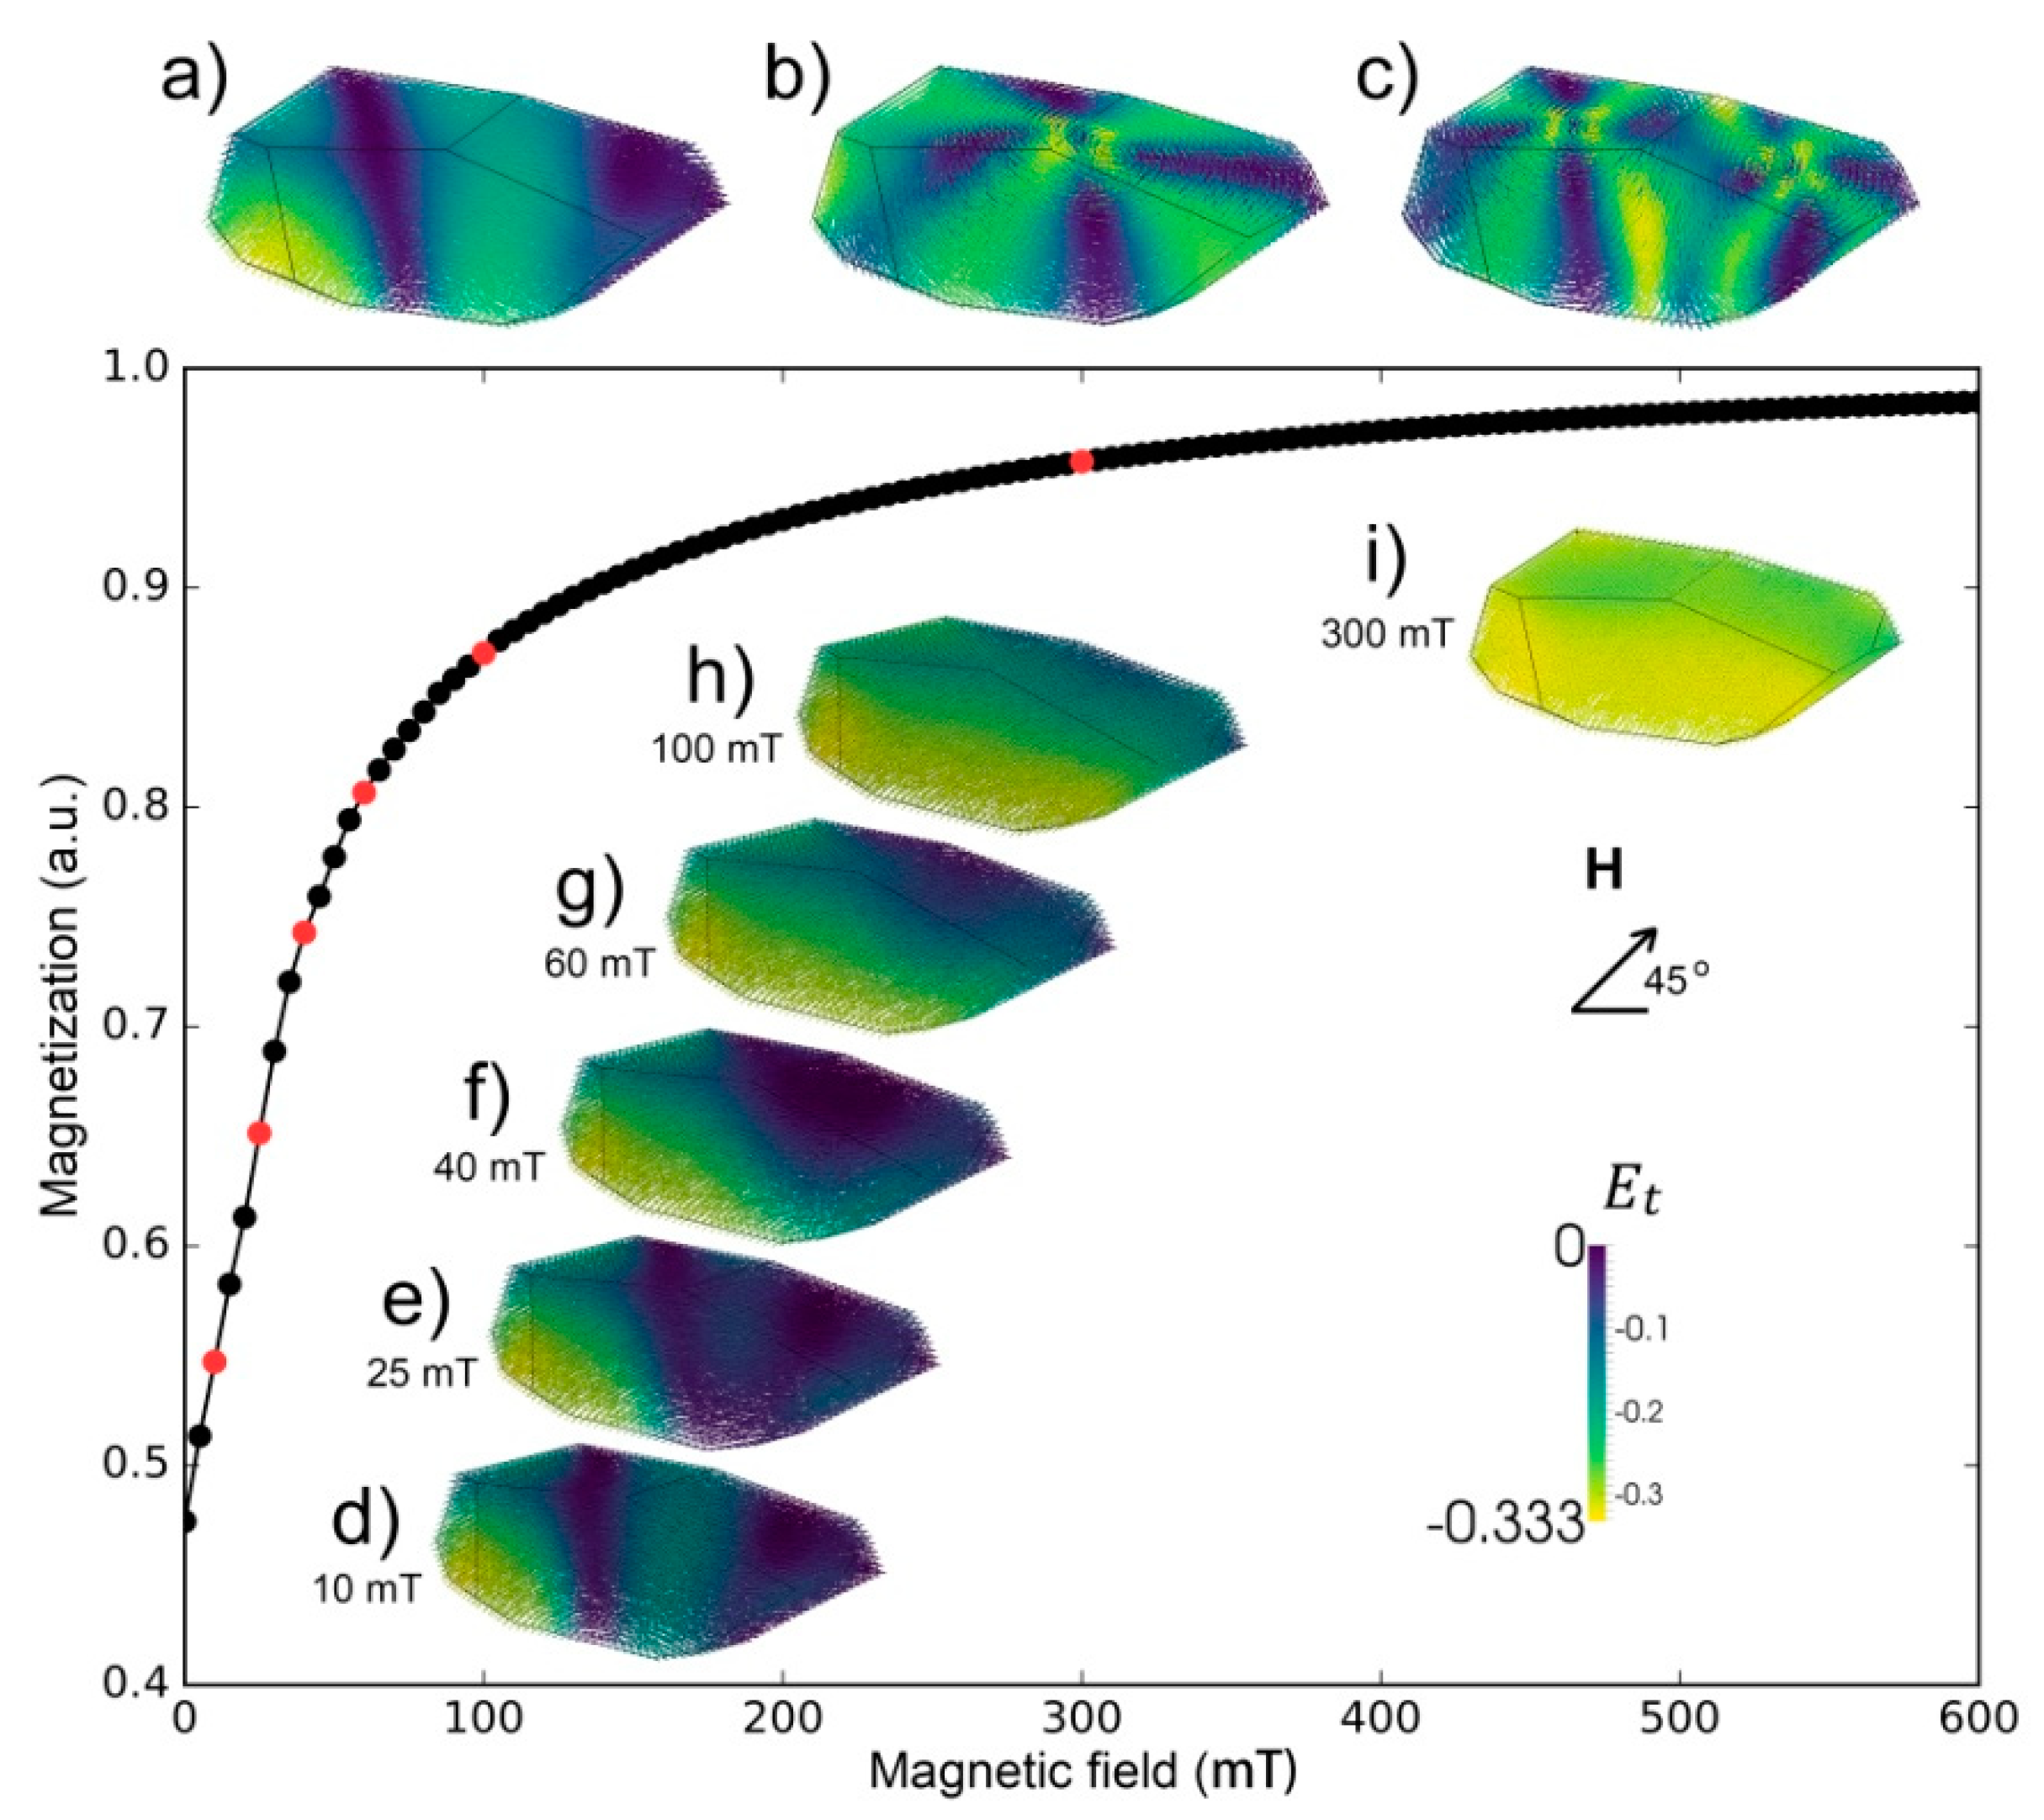 Geosciences | Free Full-Text | Modelling External Magnetic Fields of  Magnetite Particles: From Micro- to Macro-Scale | HTML